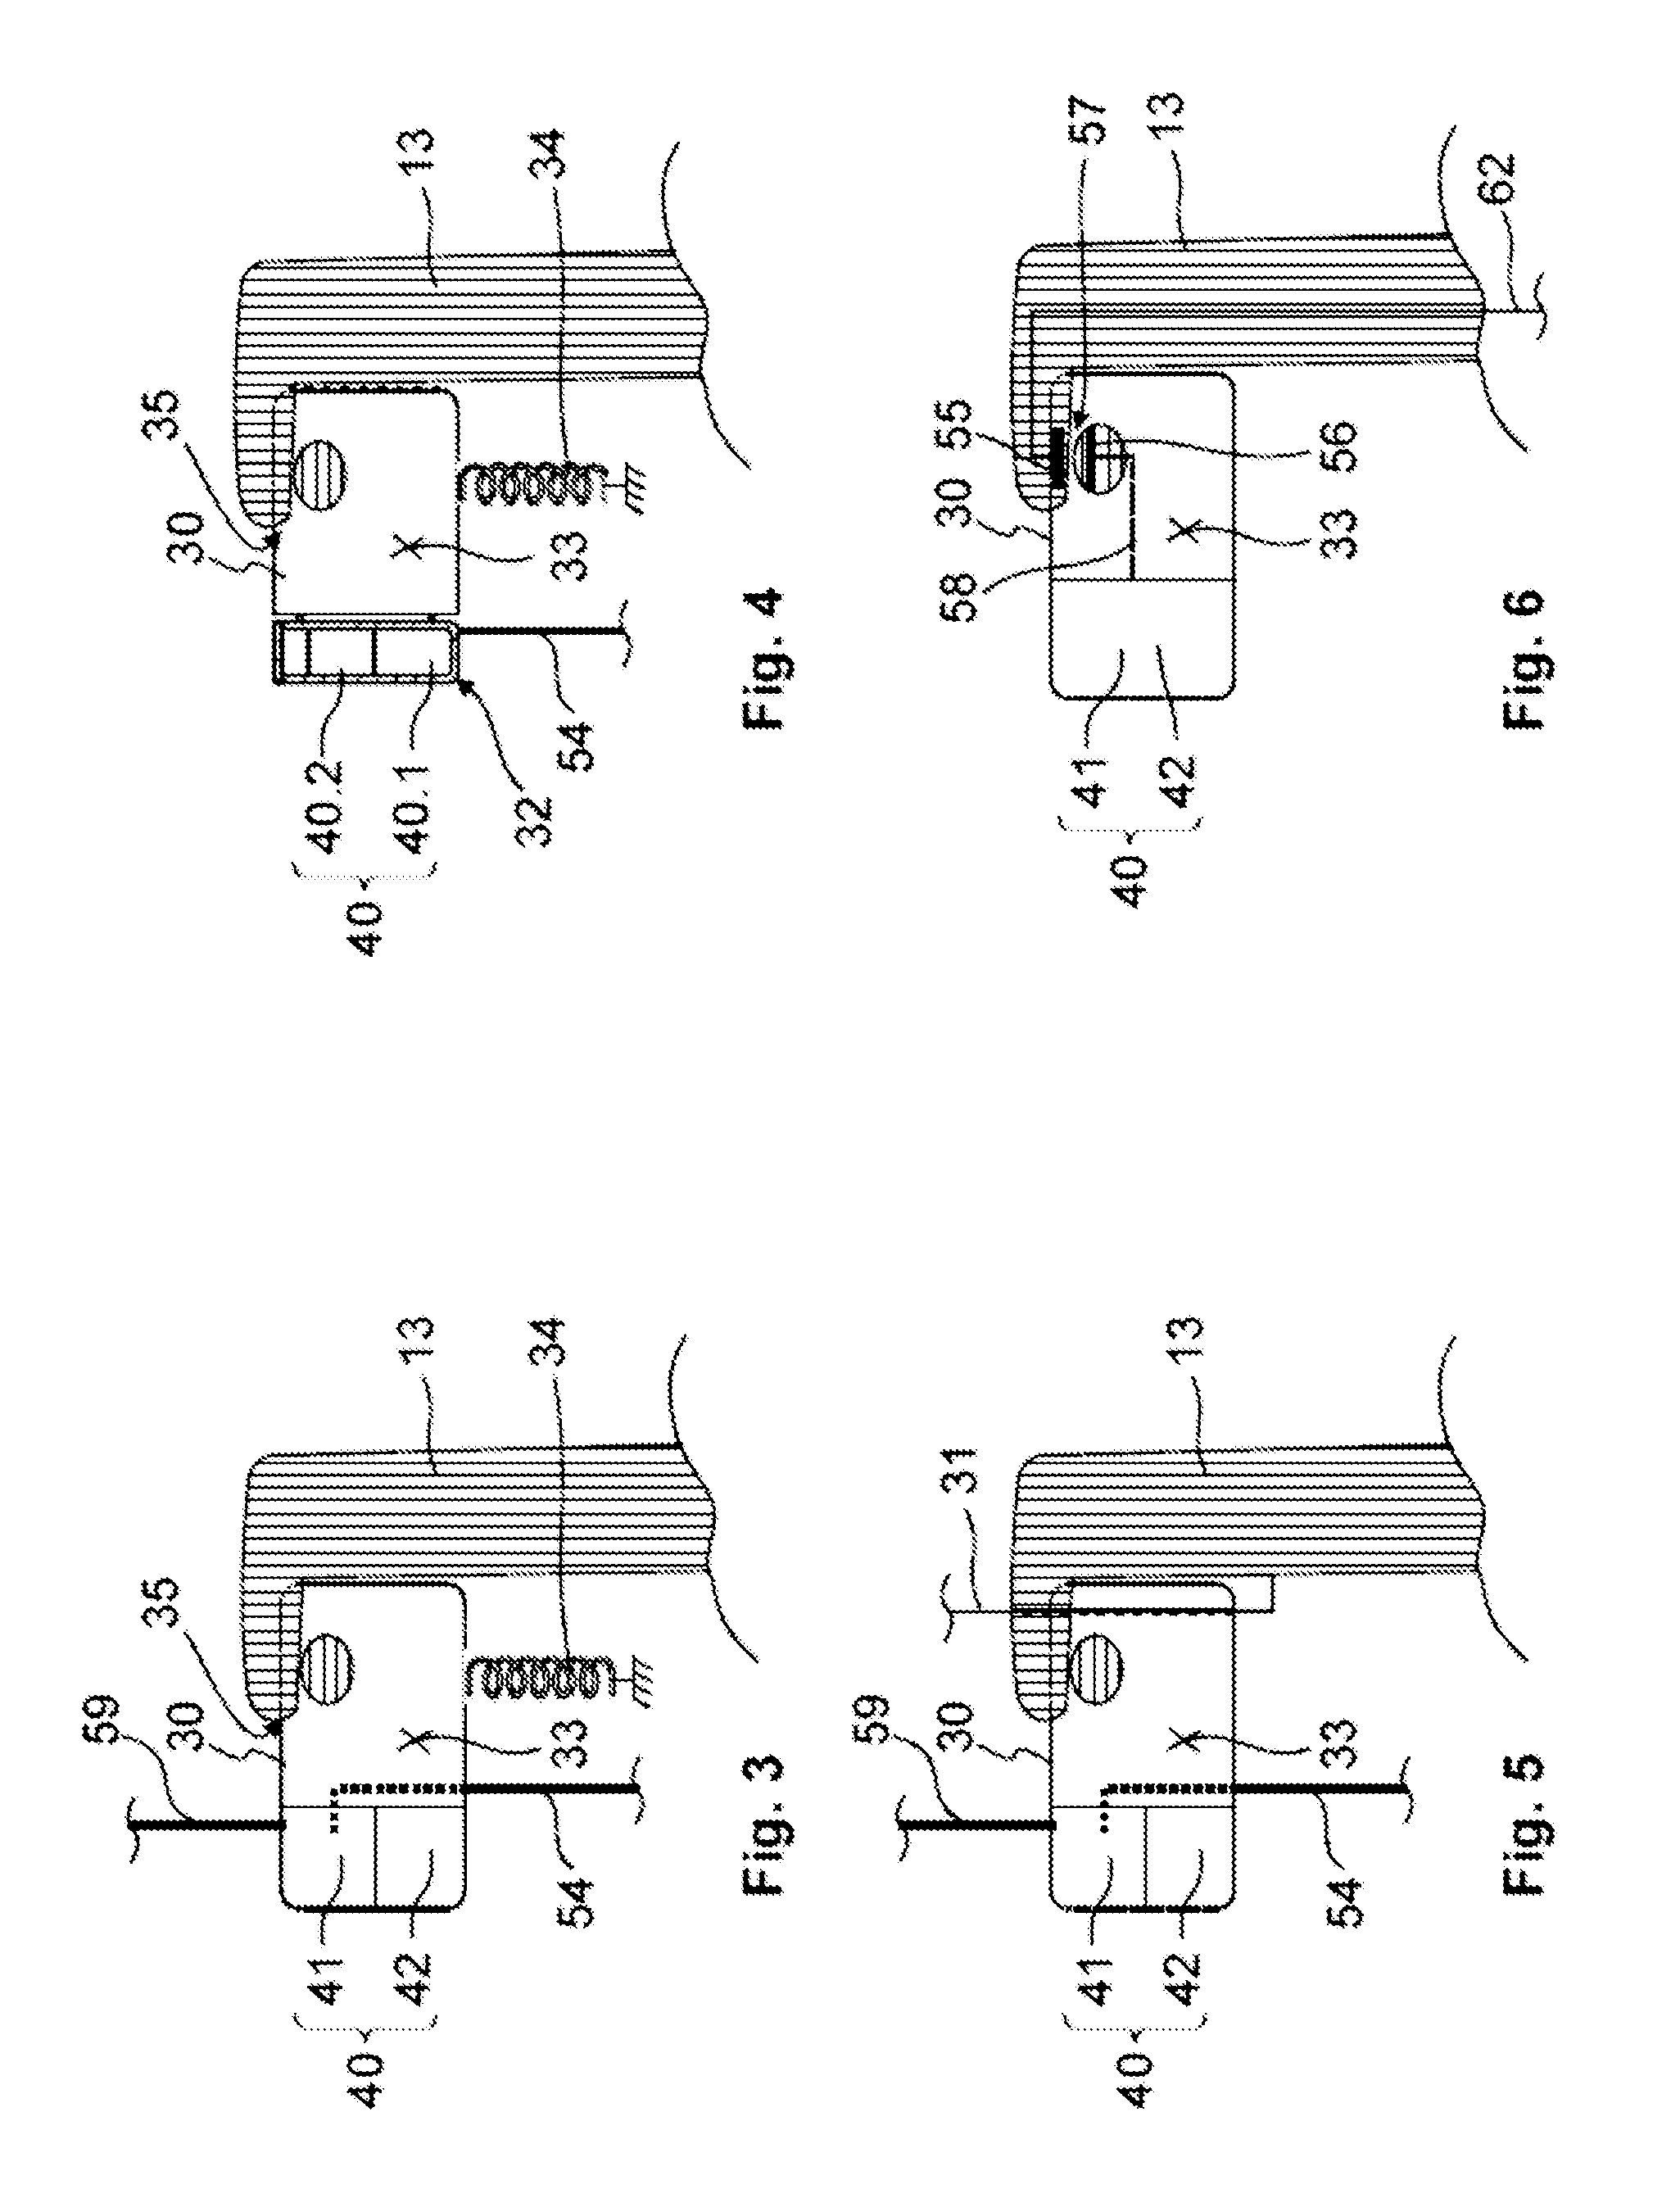 Operating device with electronics, at least partially operating as a dynamic balancer